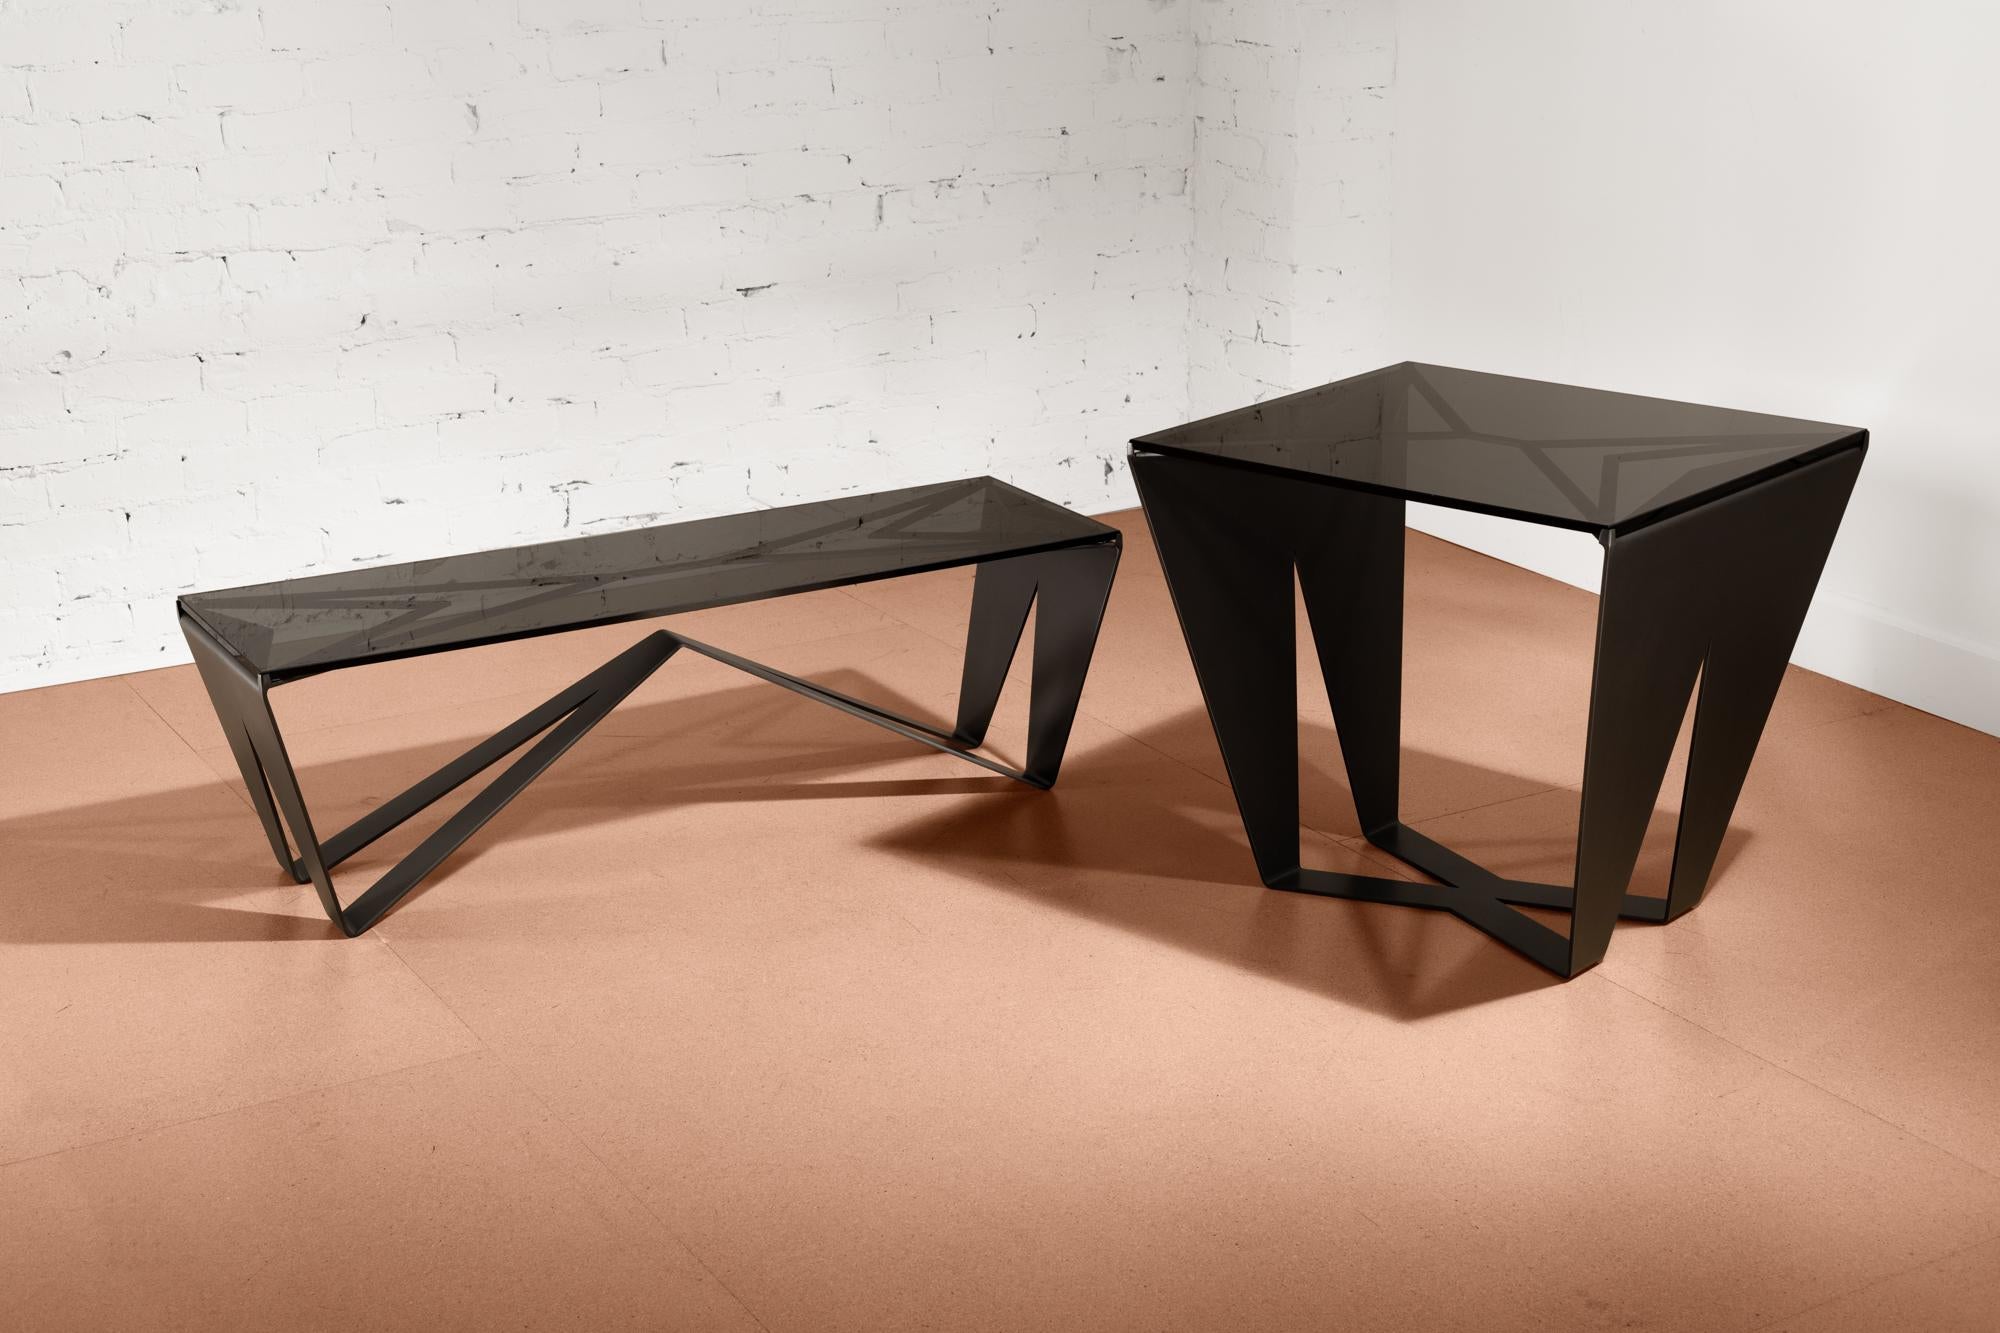 The Domino Coffee Table is part of a nesting duo of tables finely constructed and finished with satin black oxide steel and smoked glass. This table is as functional as it is an art furniture piece for the home with its intricate geometry. The